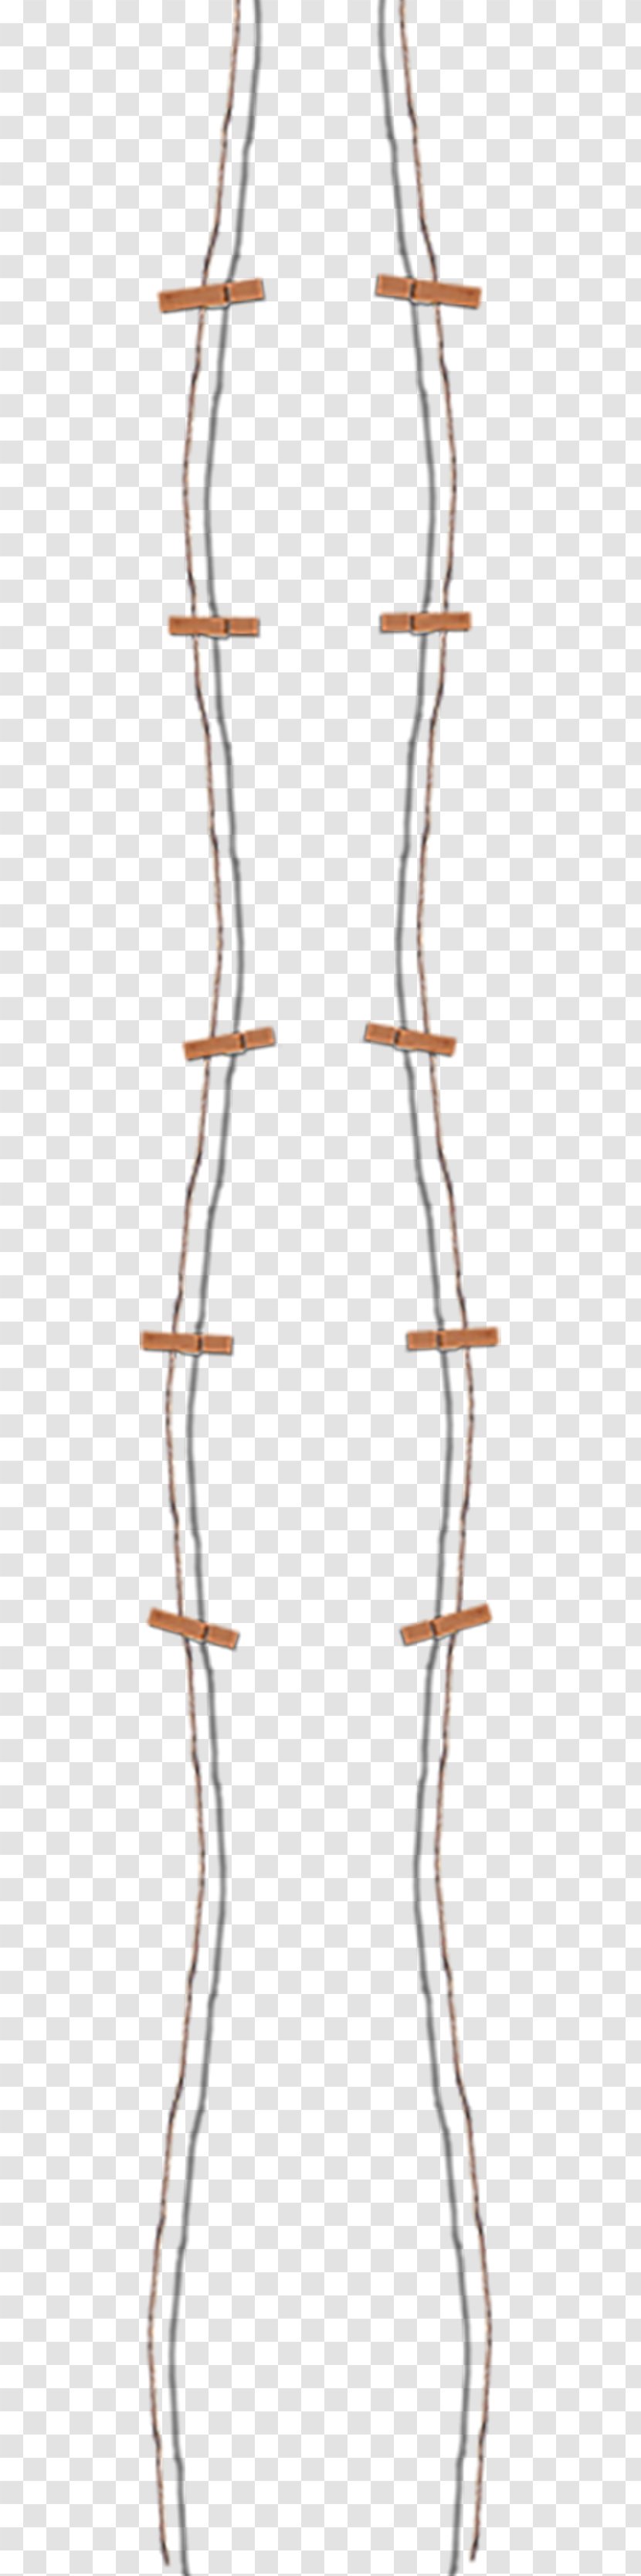 Rope Download Computer File - Cartoon - Sling Wooden Clamps Creative Transparent PNG